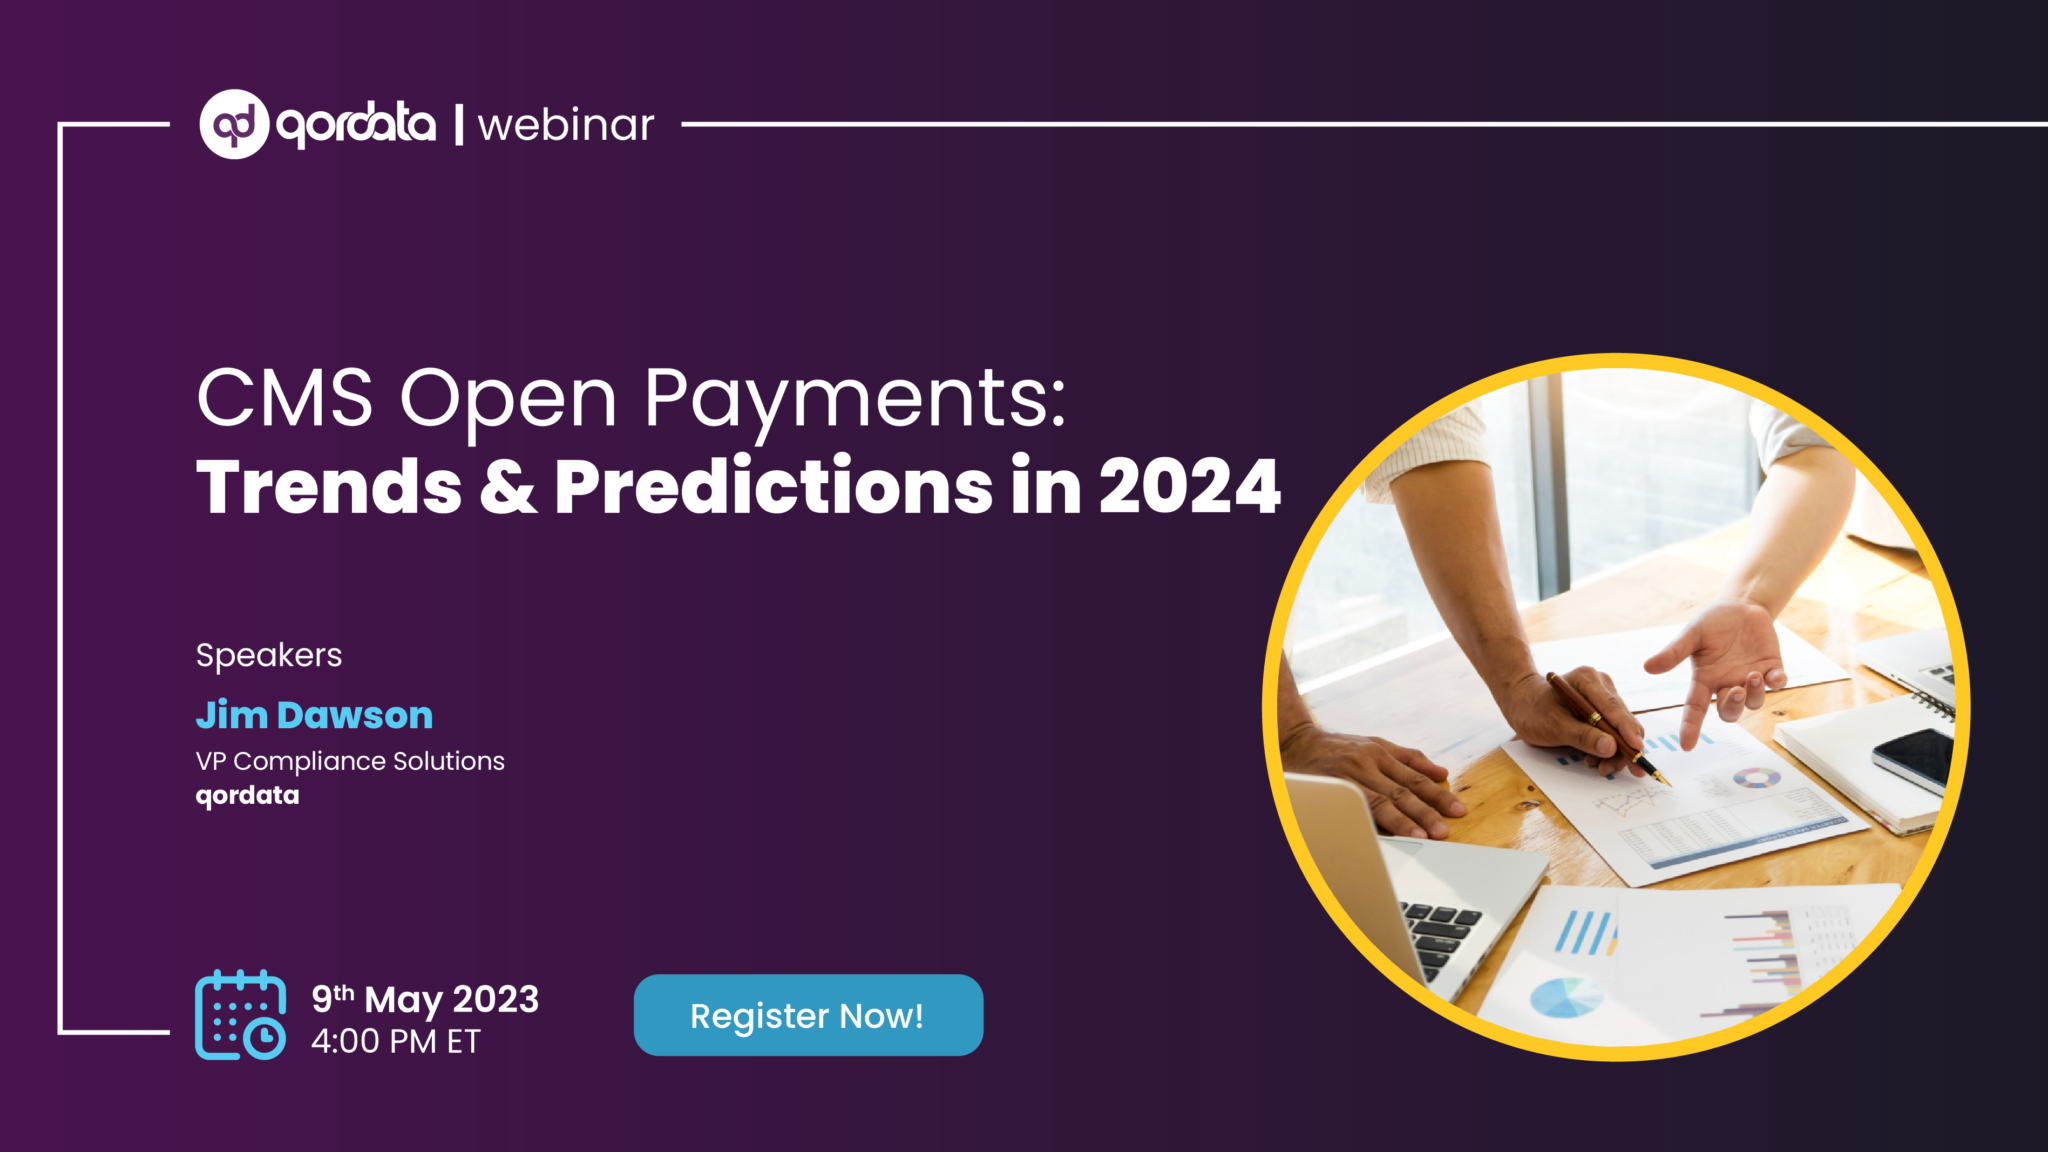 CMS Open Payments: Trends & Predictions in 2024